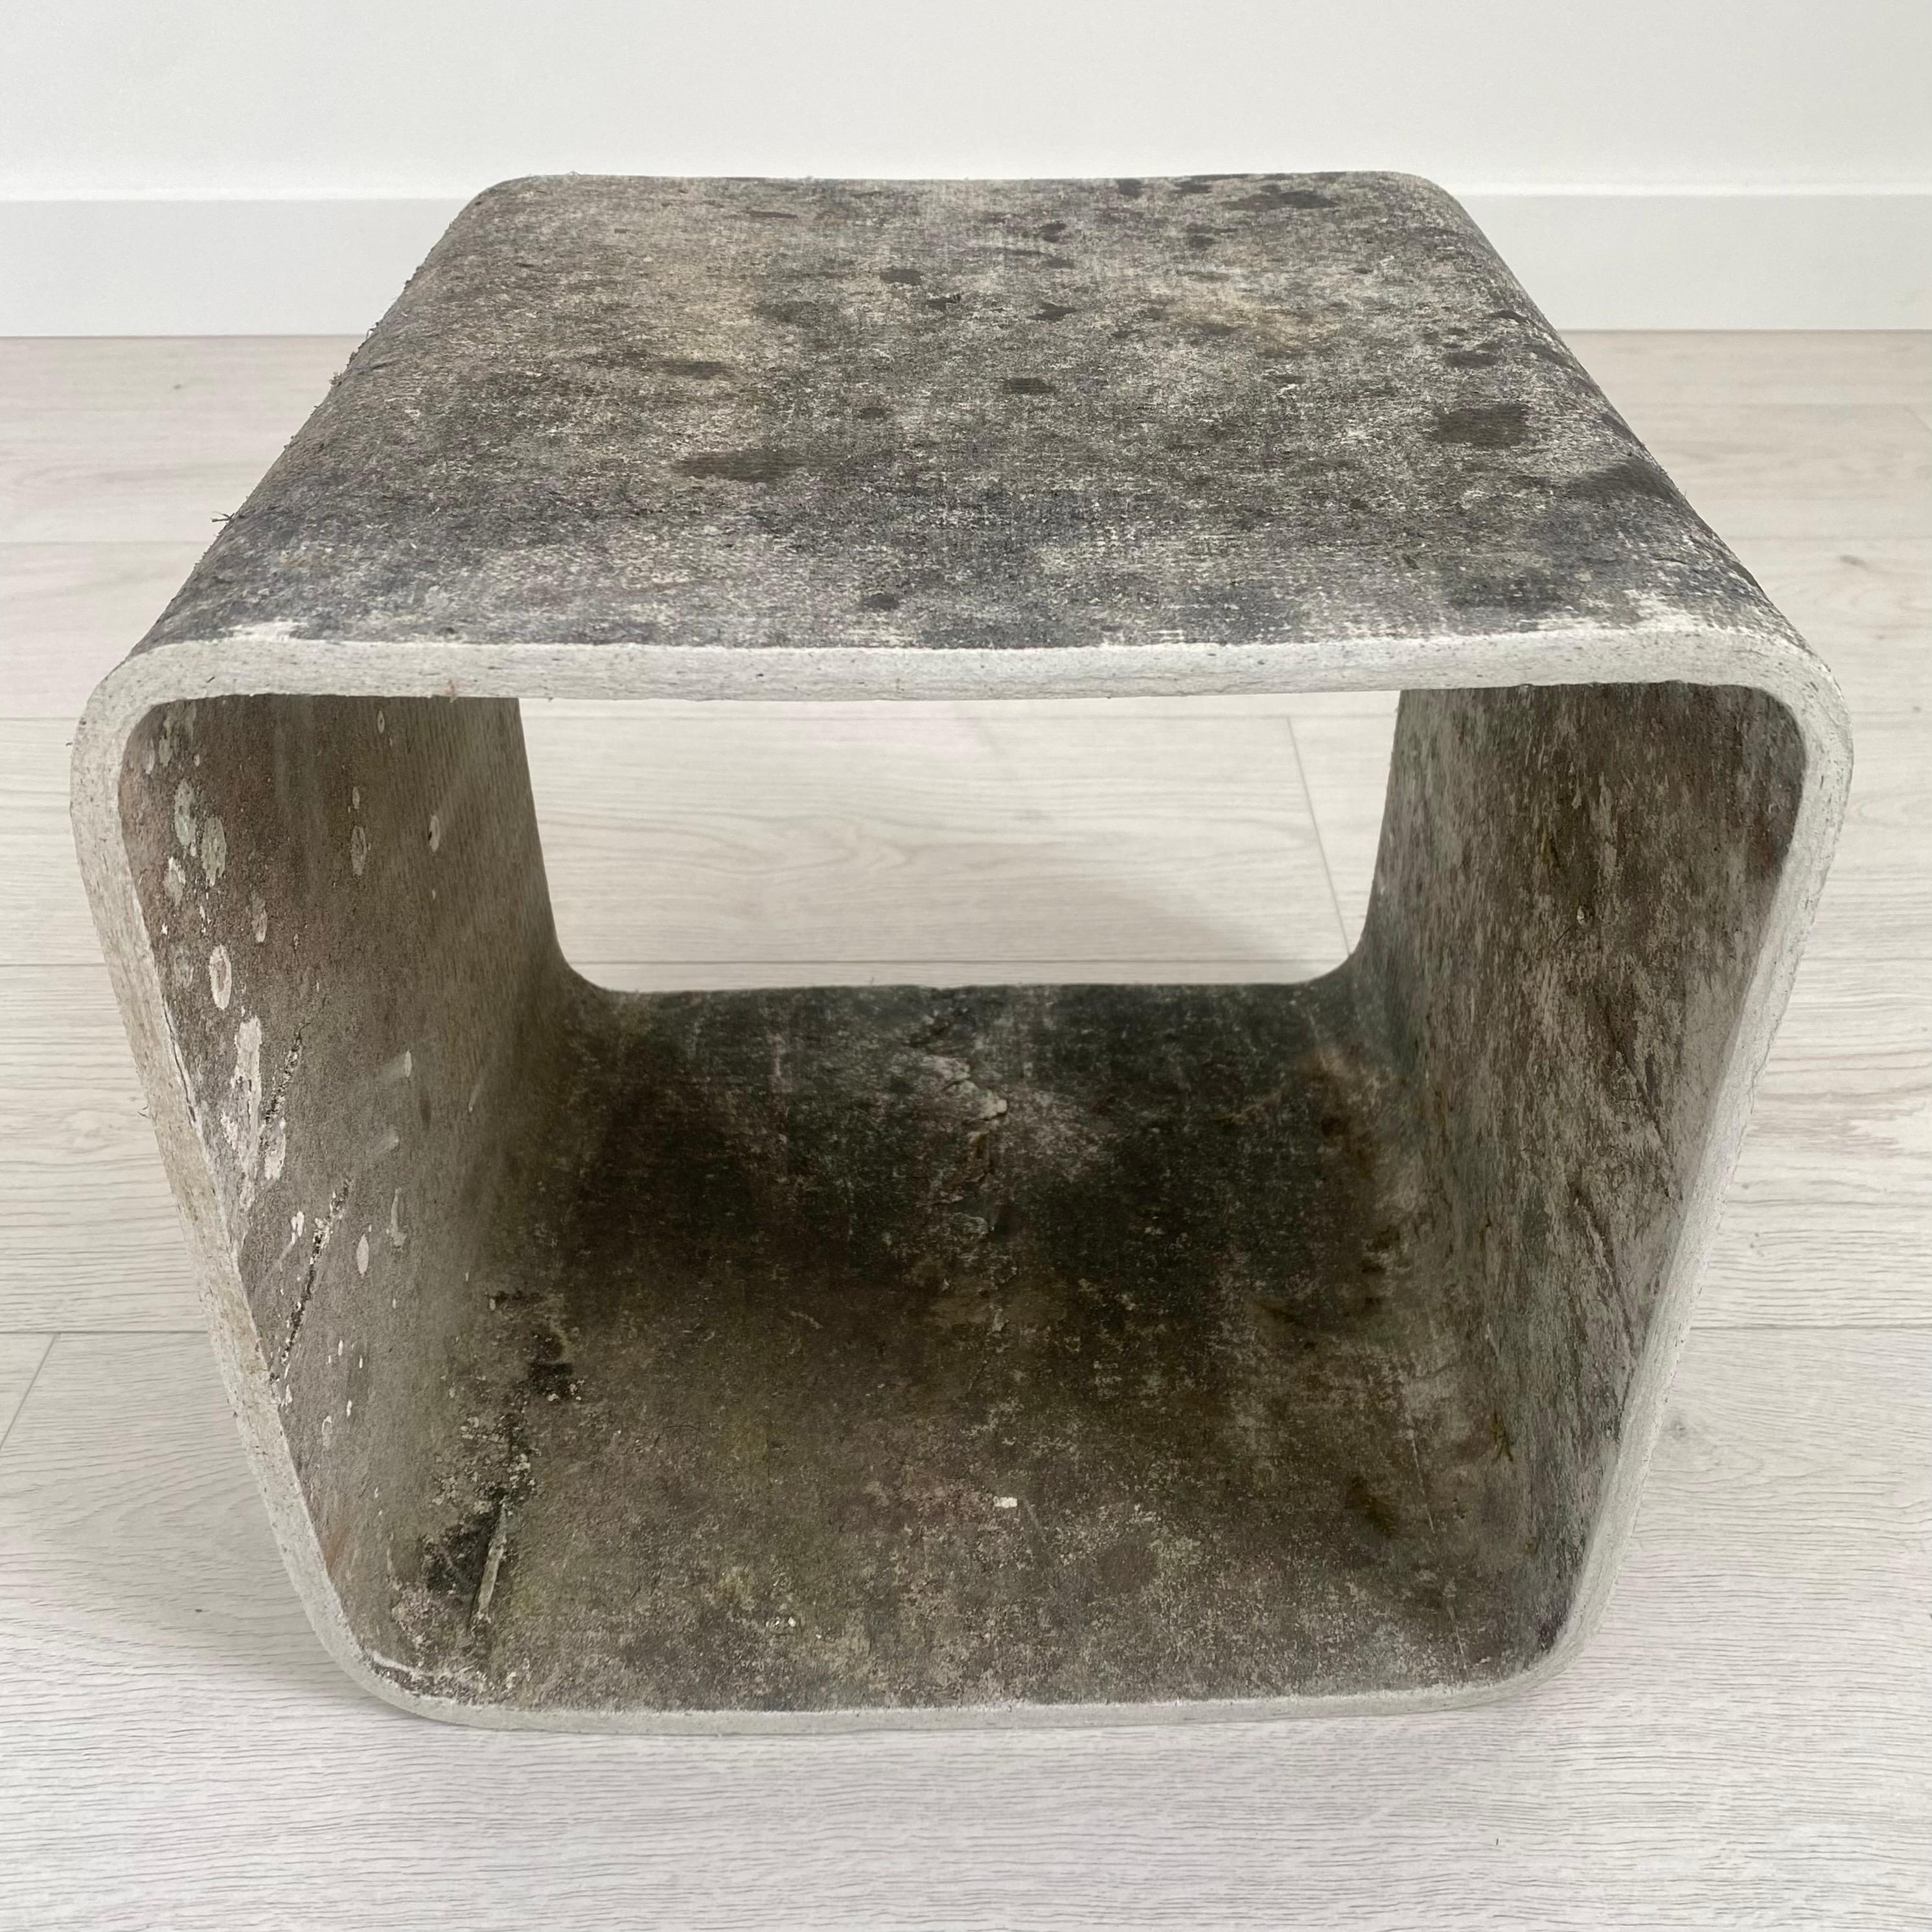 Sculptural concrete cube side table by Swiss architect Willy Guhl. Handmade in Switzerland in the early 1960s. Produced by Eternit. Age and weather has given this piece an inimitable patina. Sturdy and well made. Beautiful piece on its own or a